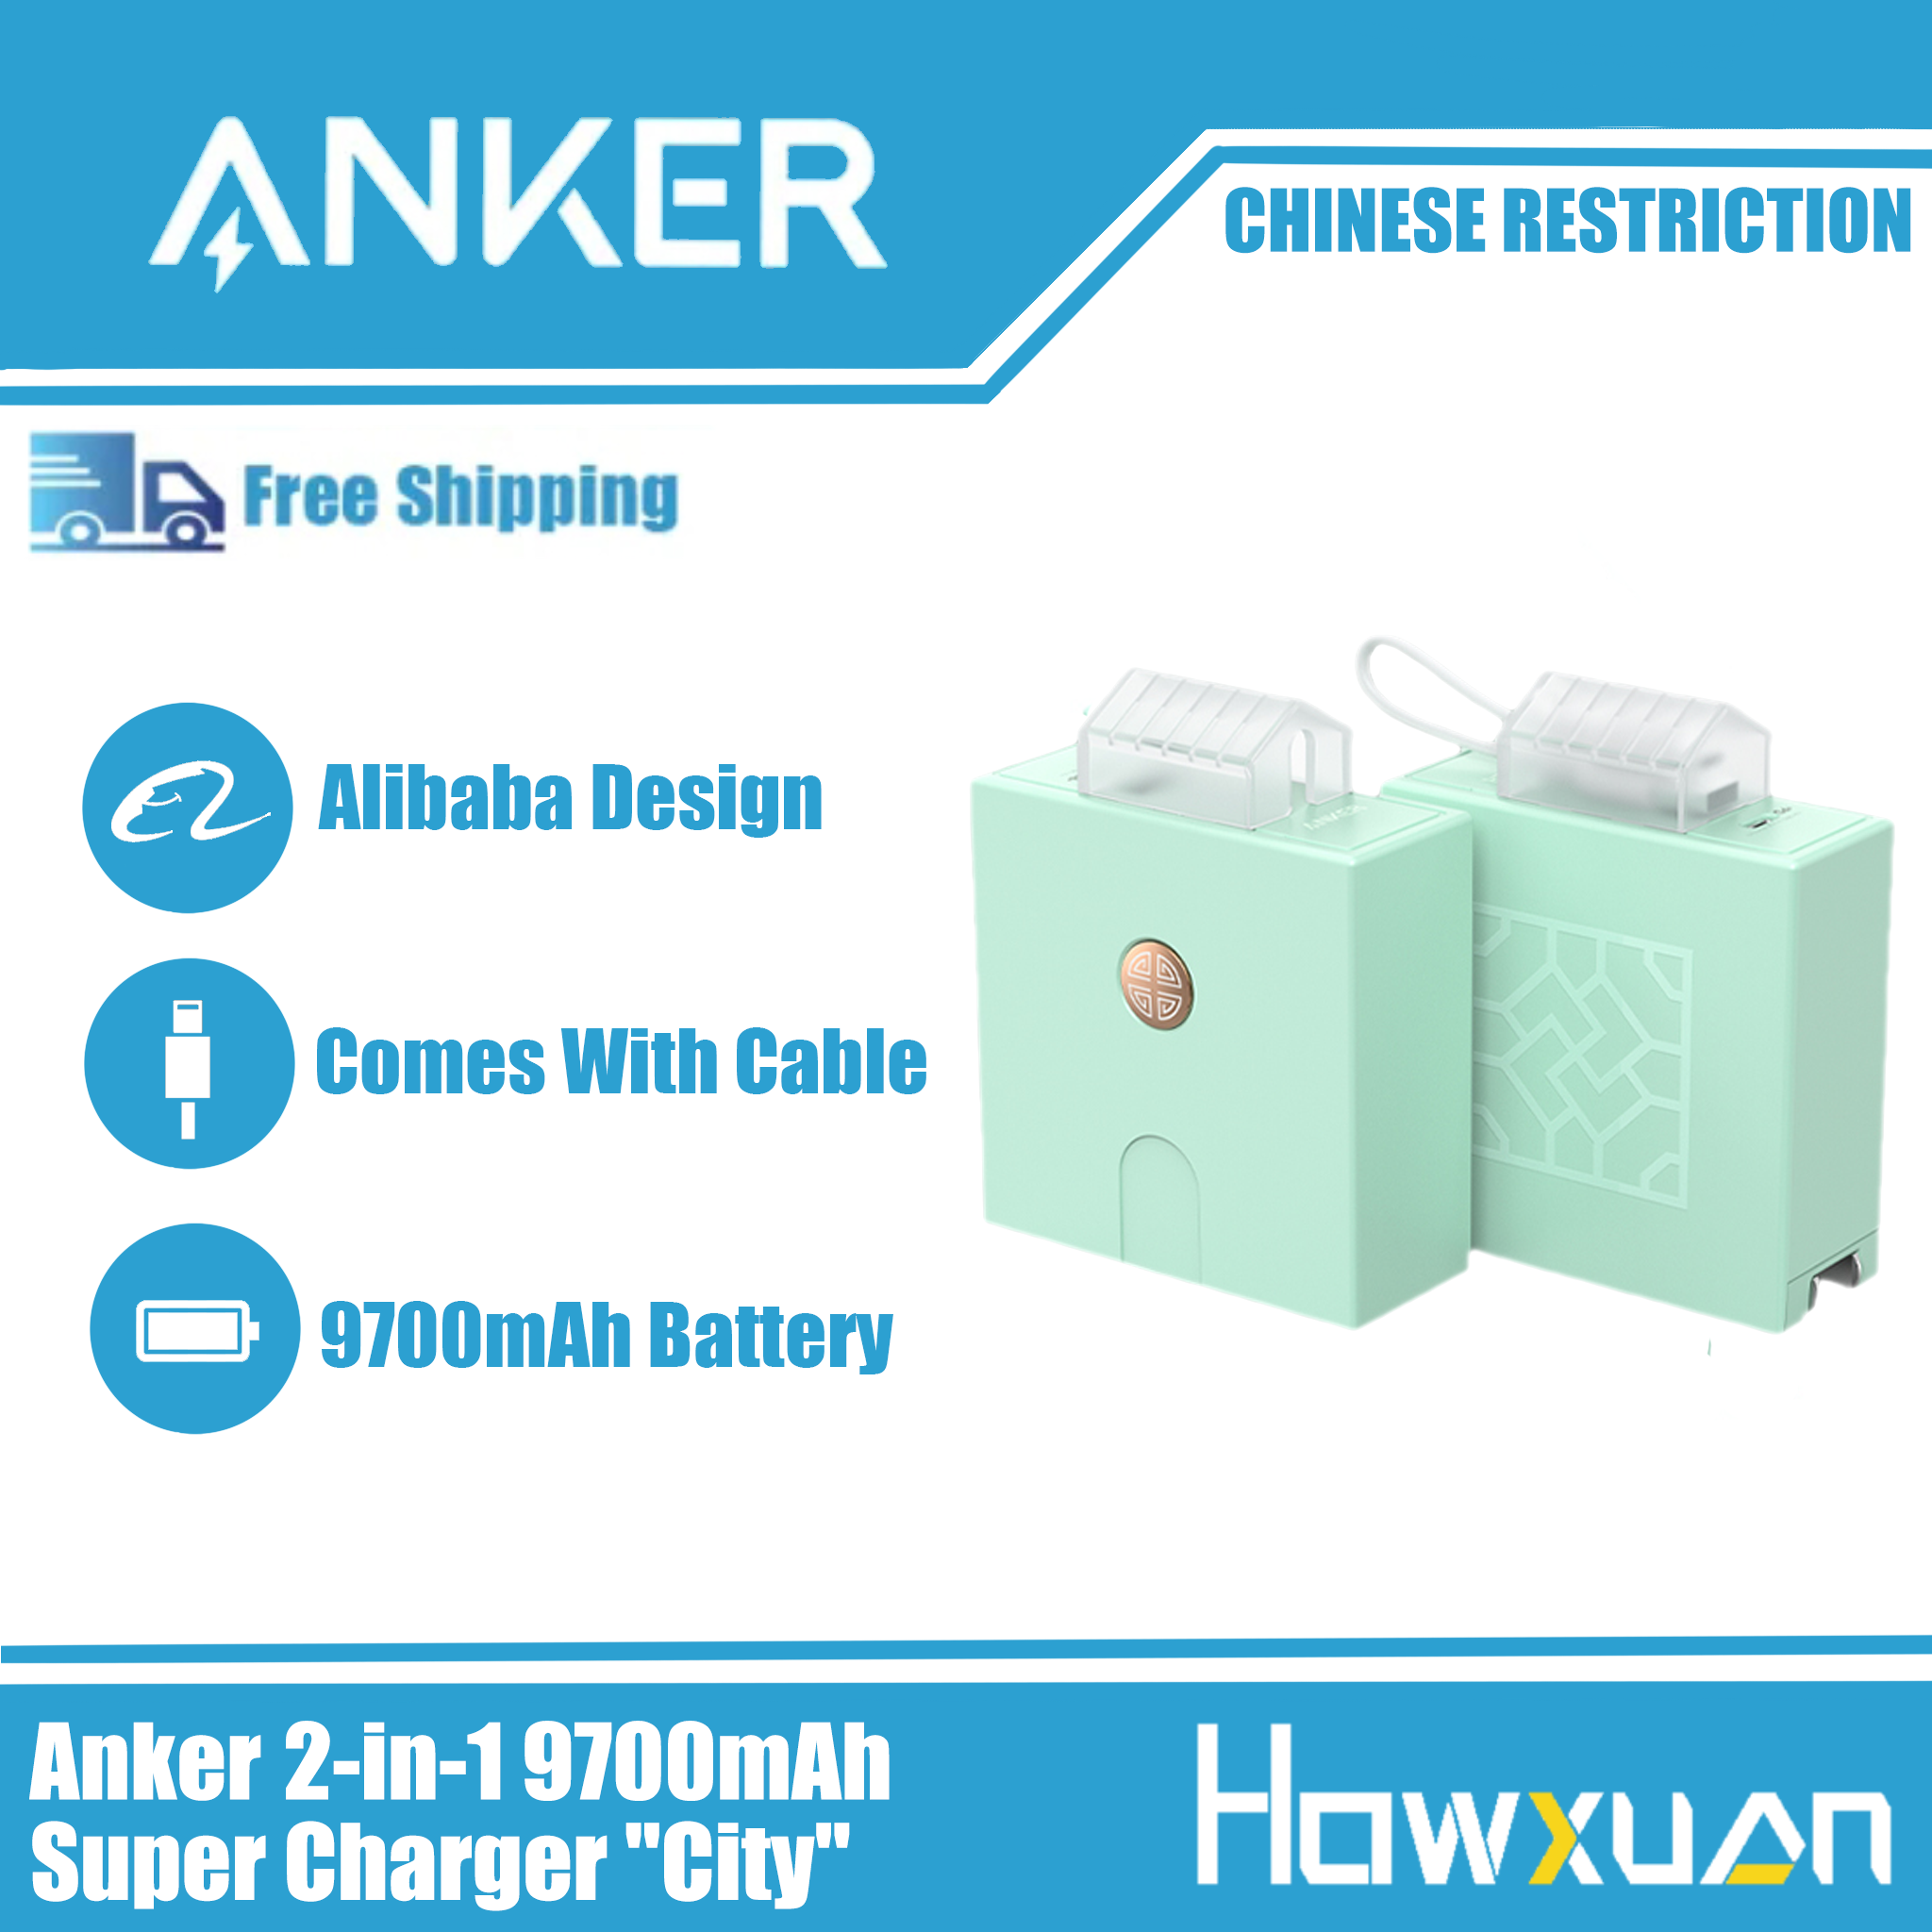 Anker CITY 2-in-1 Charger and Power Bank 9700mAh Chinese Restriction PD QC